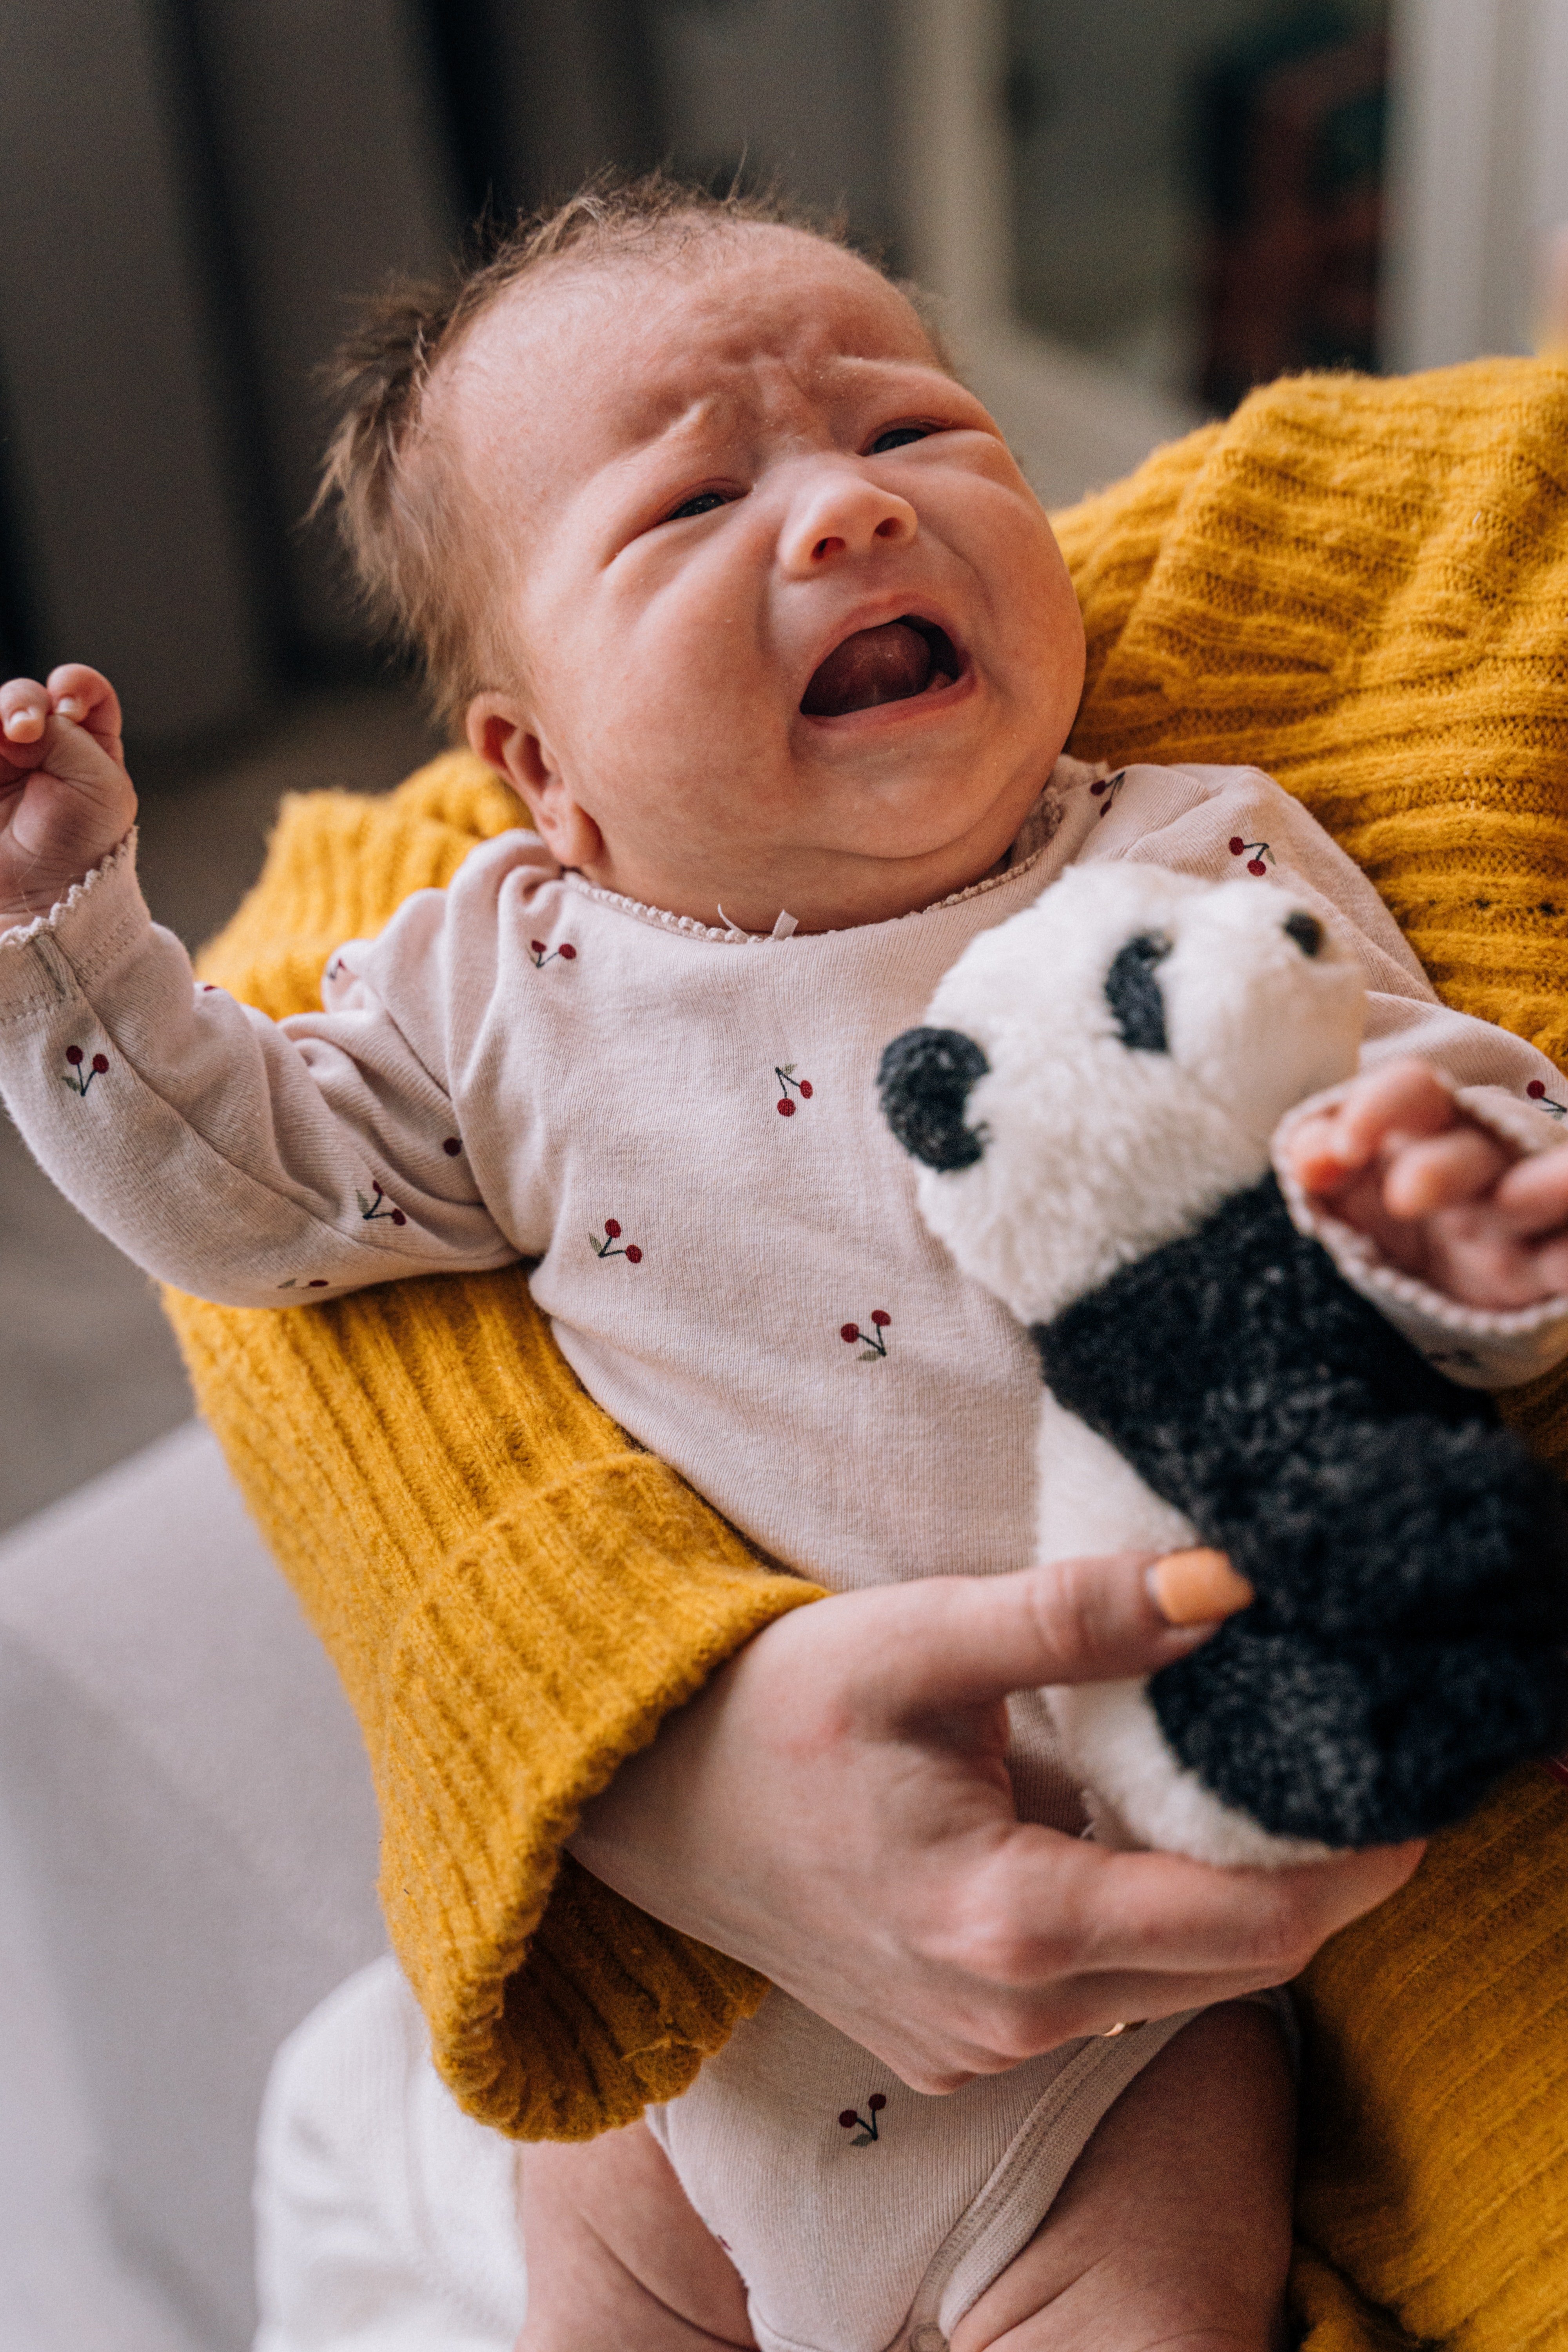 Daisy was surprised to find out that her daughter seemed to not like the chair. | Source: Pexels